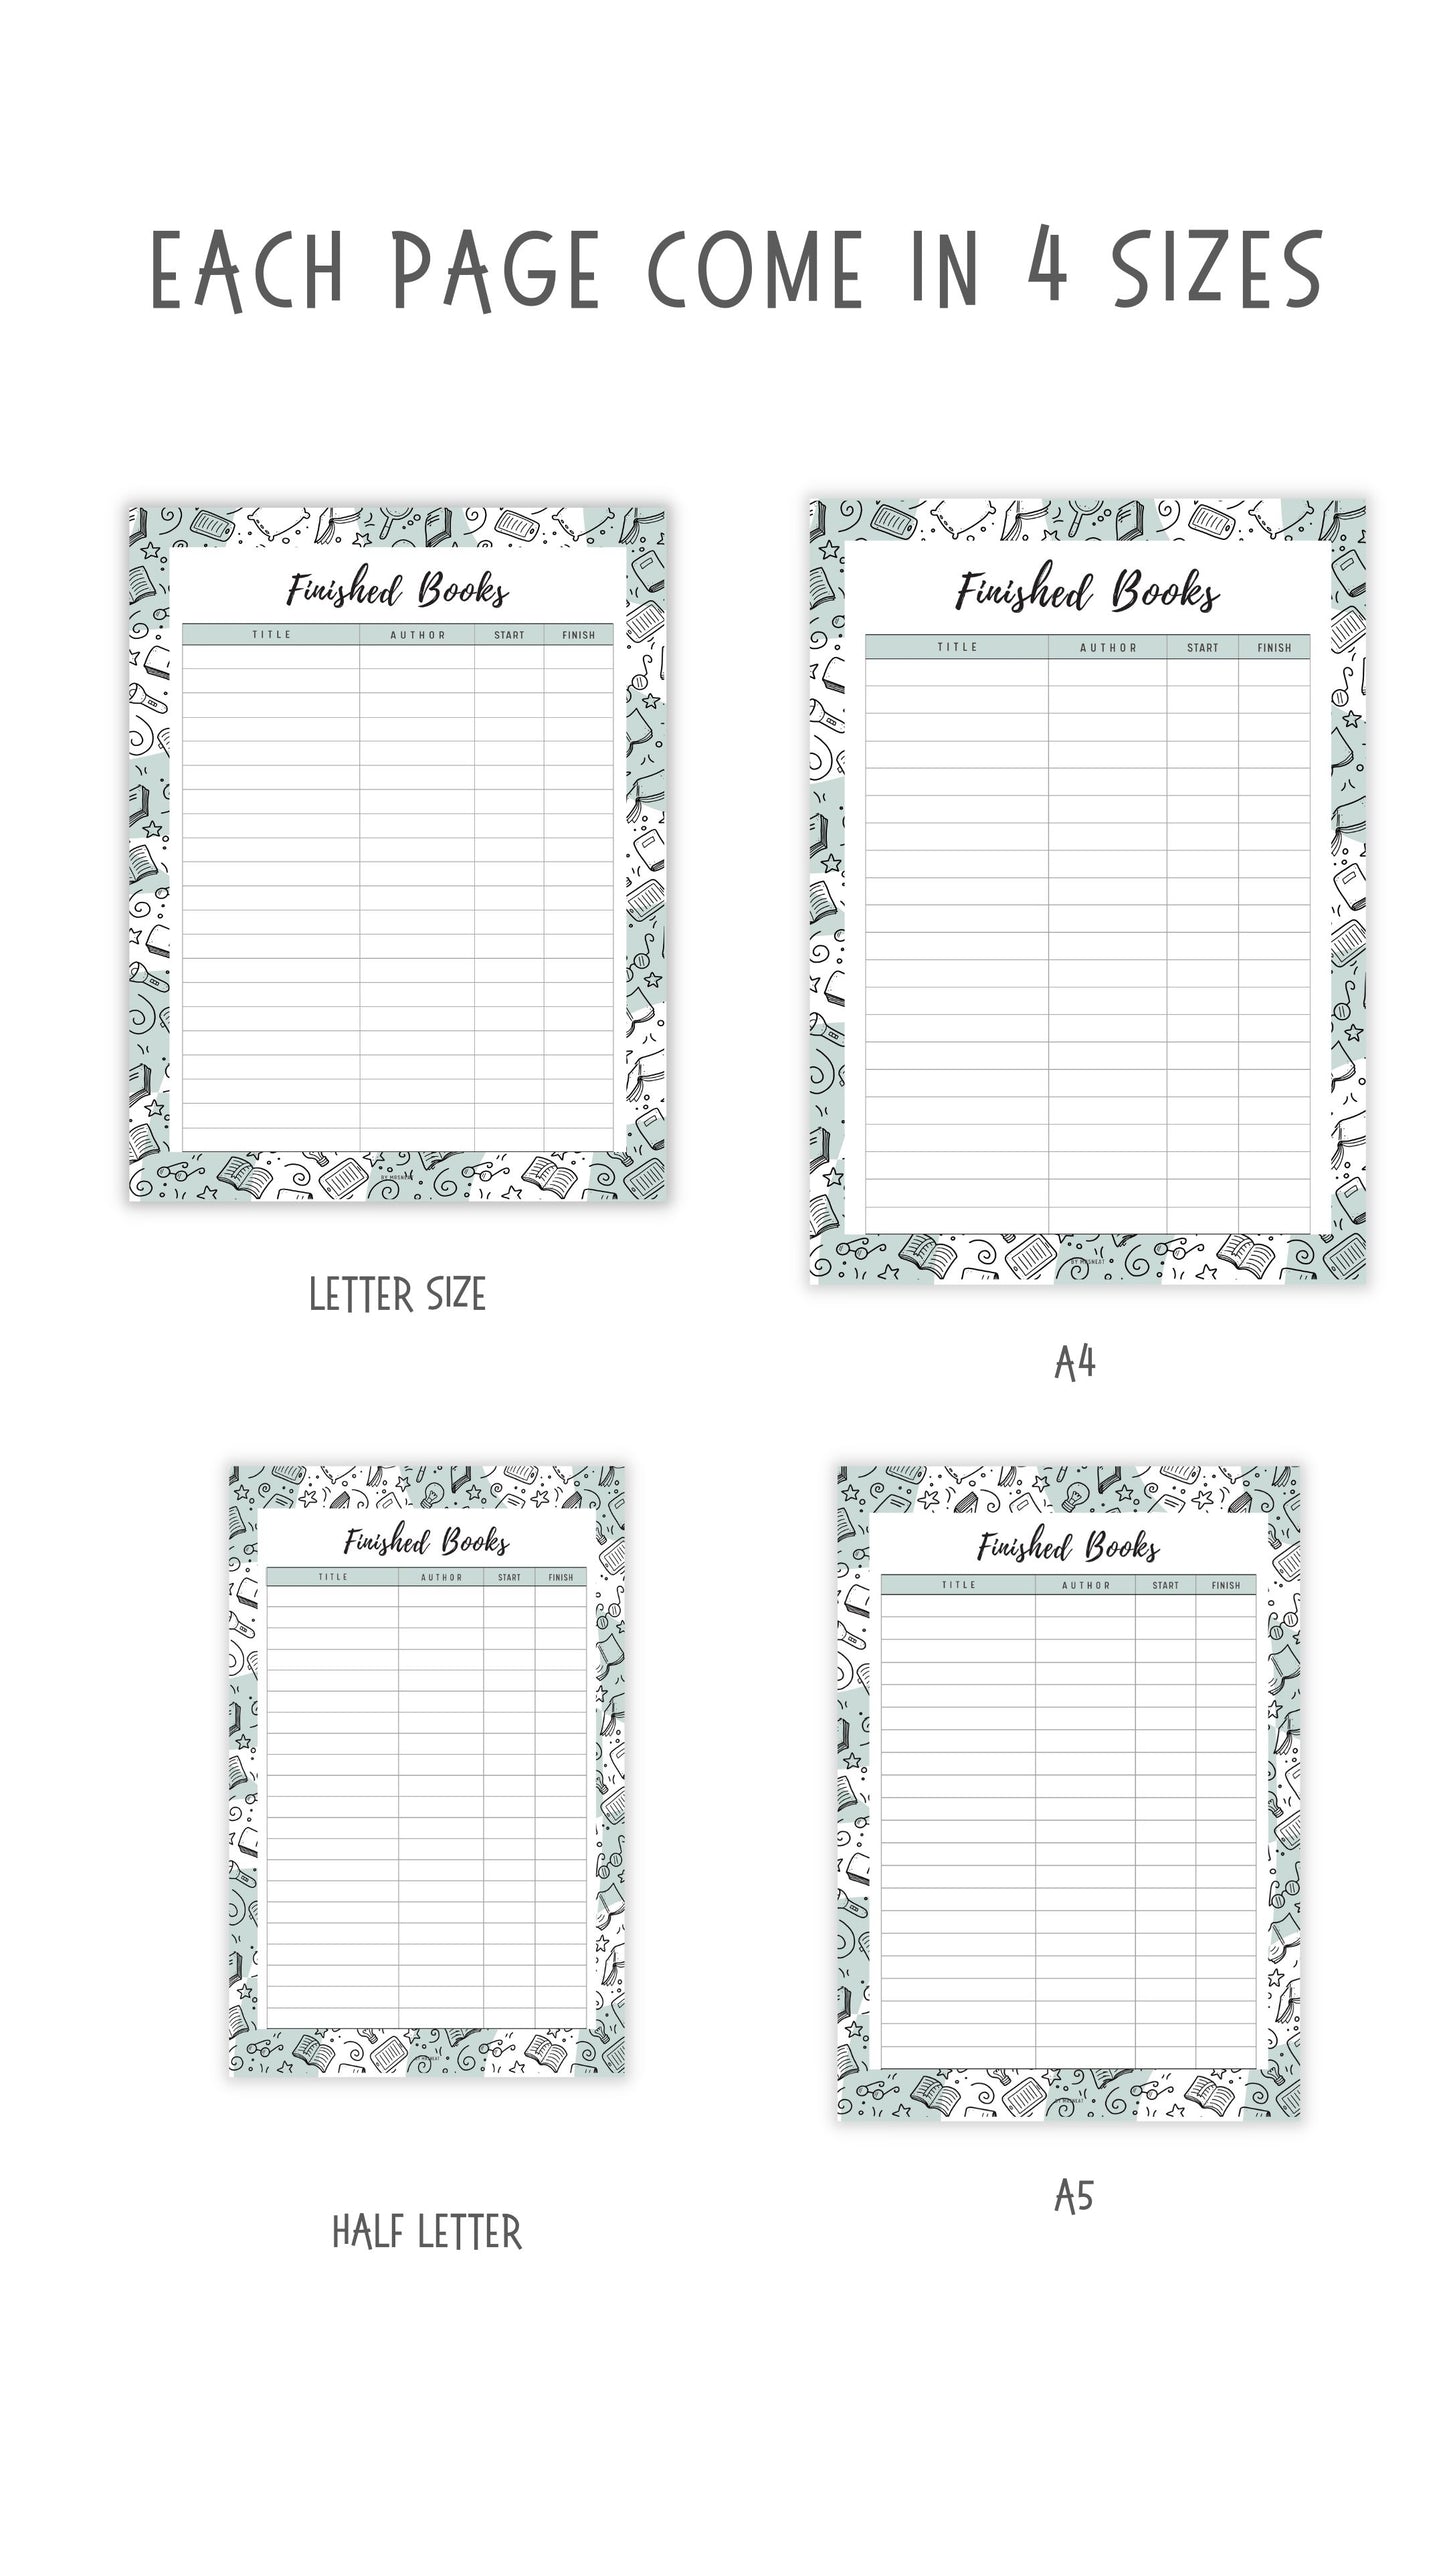 Books I Finished Template Printable, 5 colors ; Peach, Pink, Blue, Green, Neutral, 4 sizes ; A4, A5, Letter, Half Letter, Digital Planner